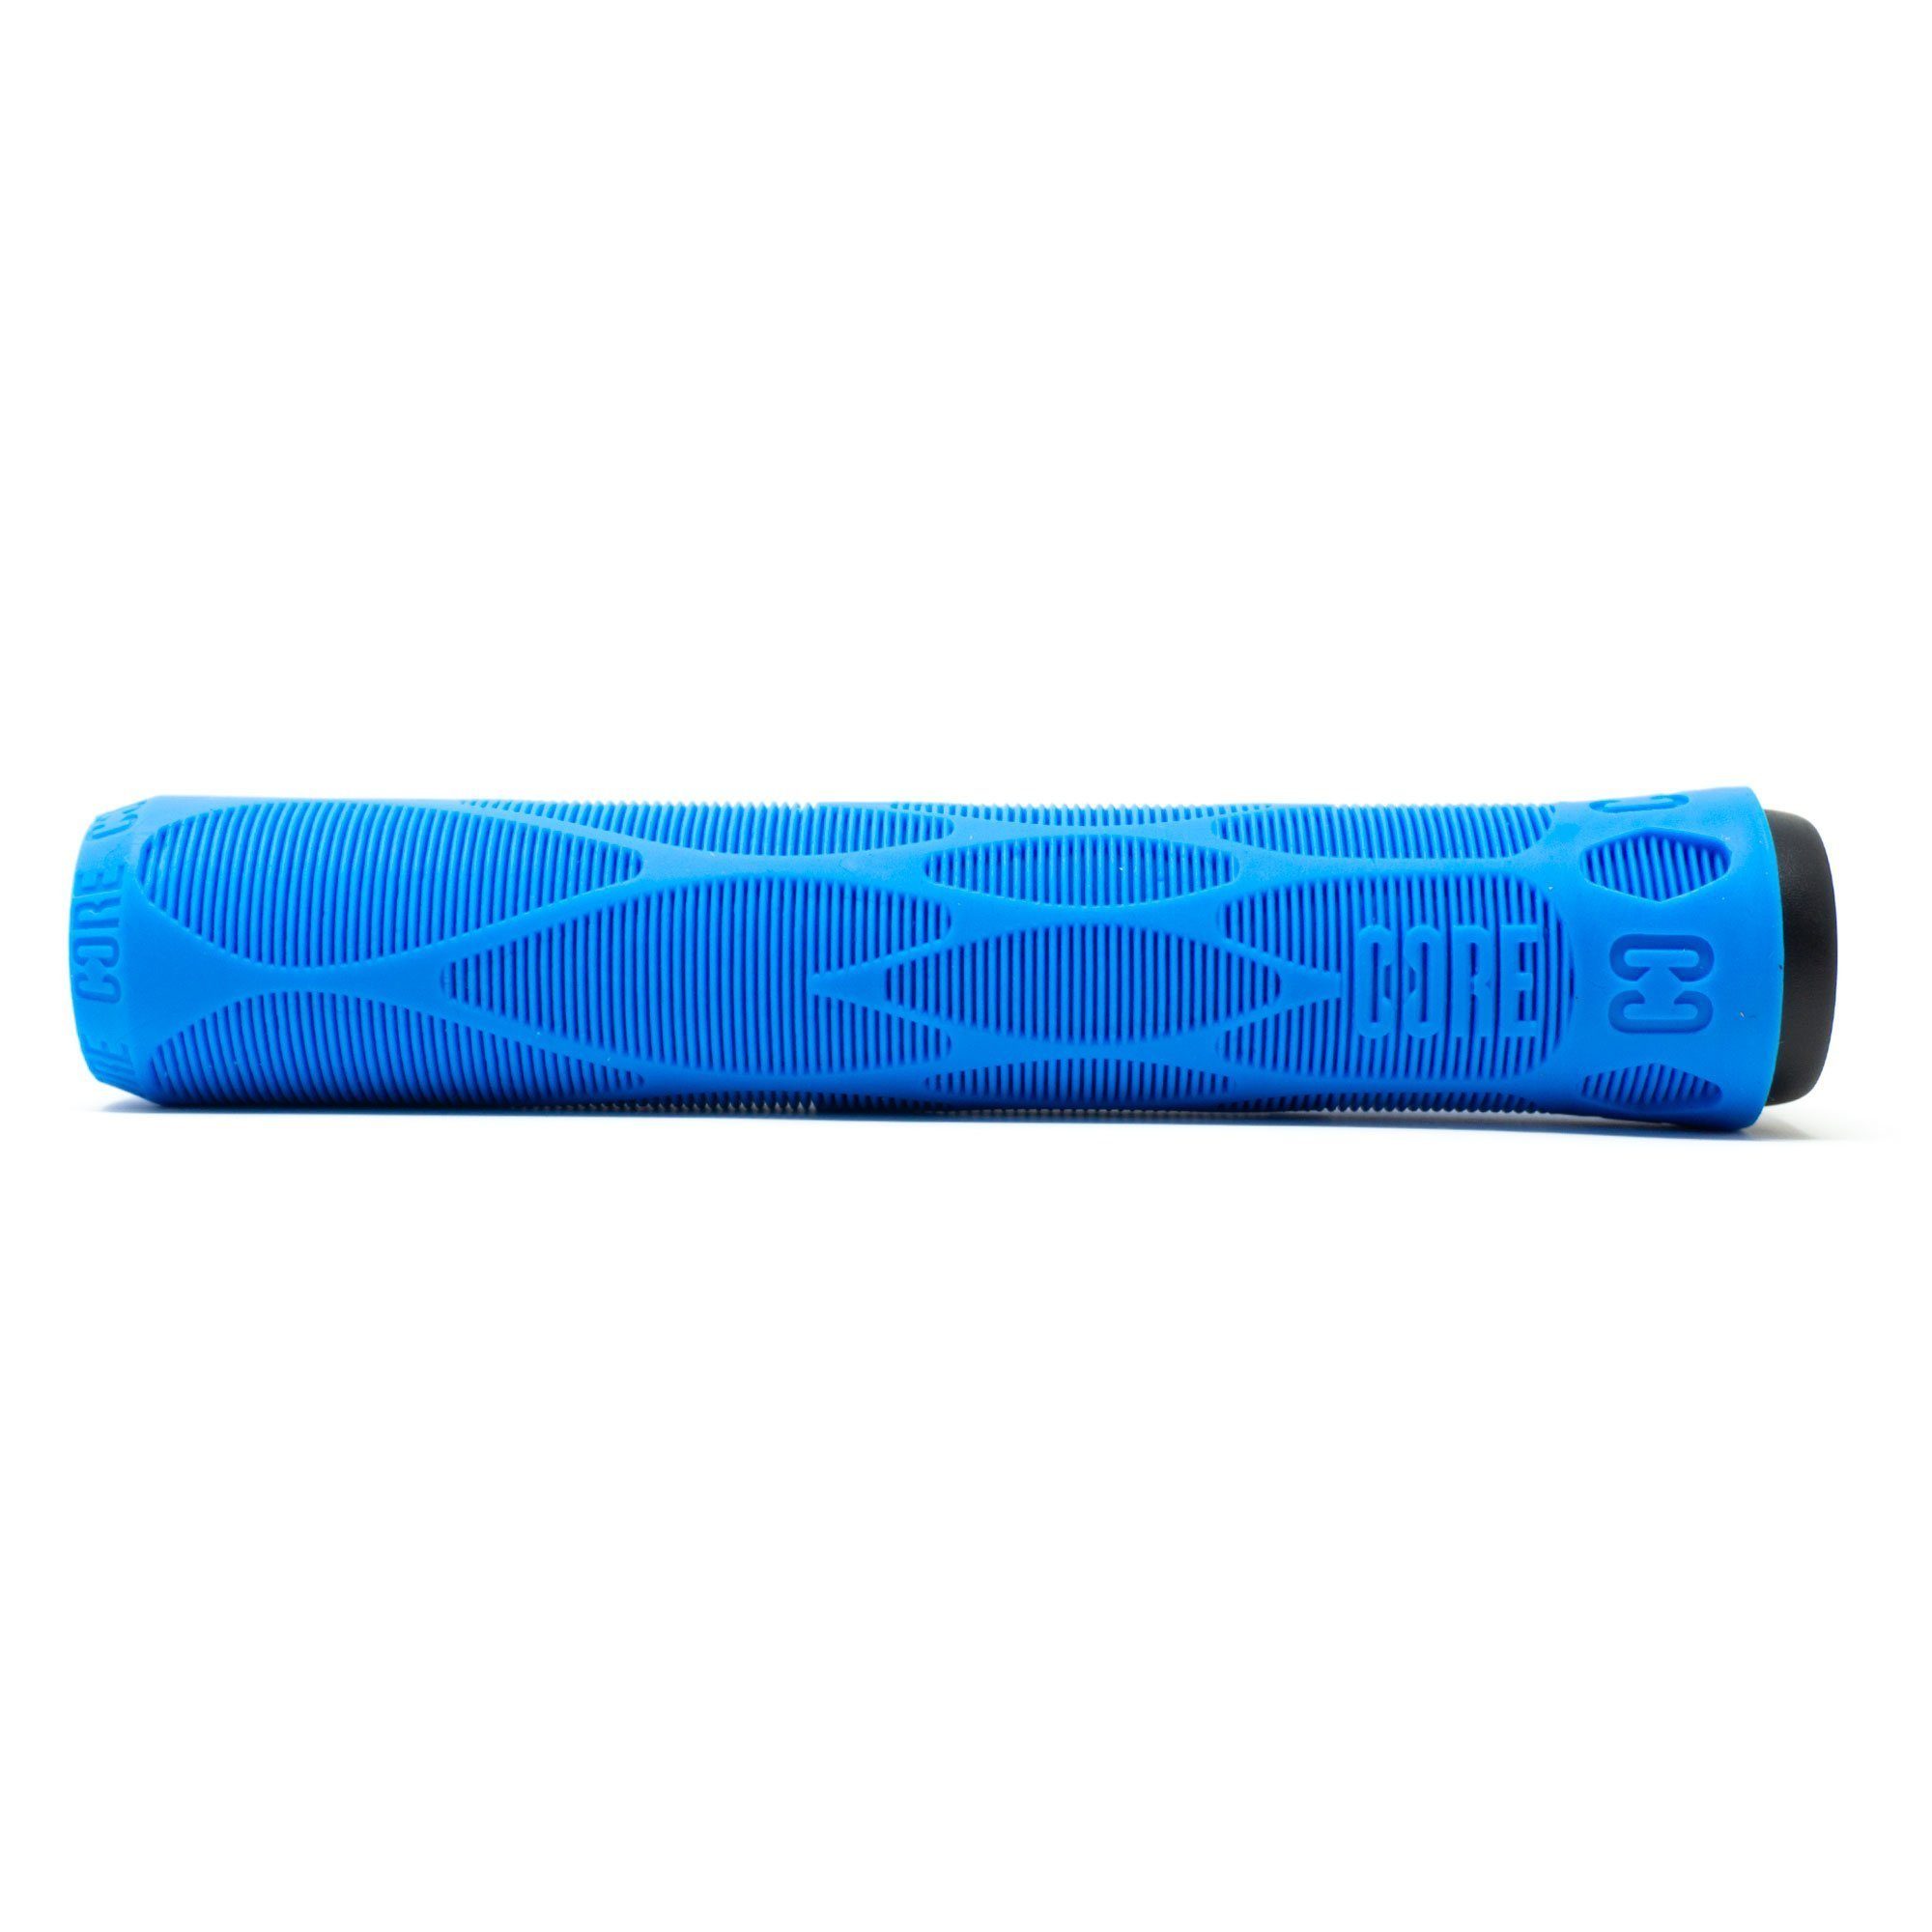 Sports Action soft Griffe Stuntscooter Stunt-Scooter Core Pro blau Core 170mm